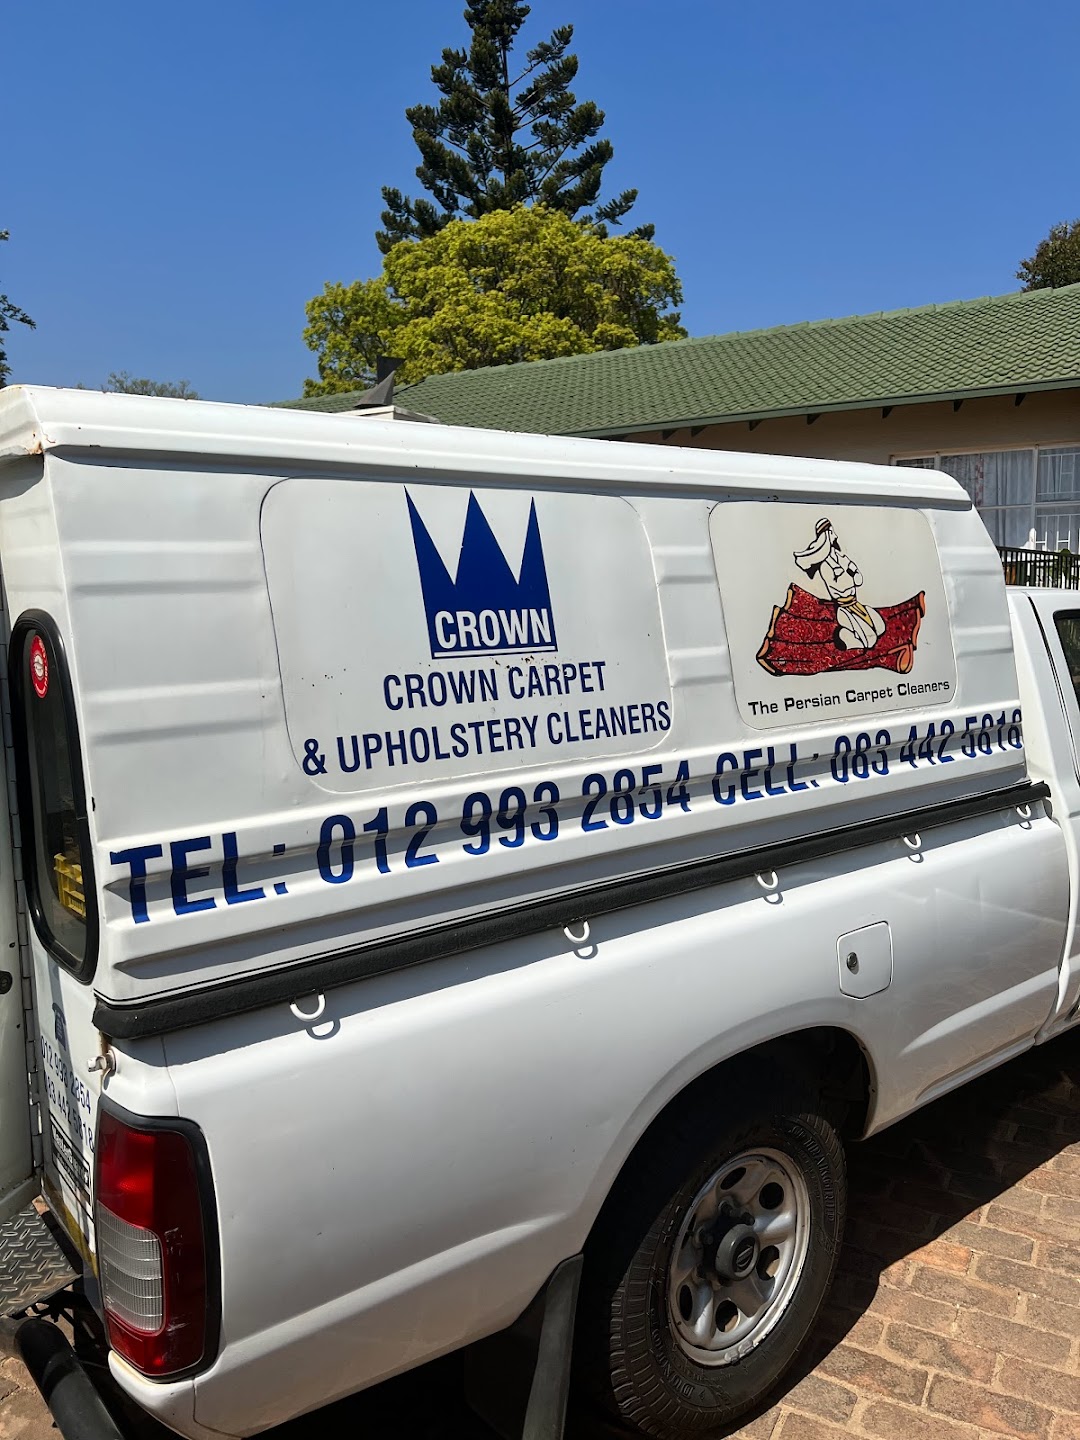 Crown Carpet Cleaners